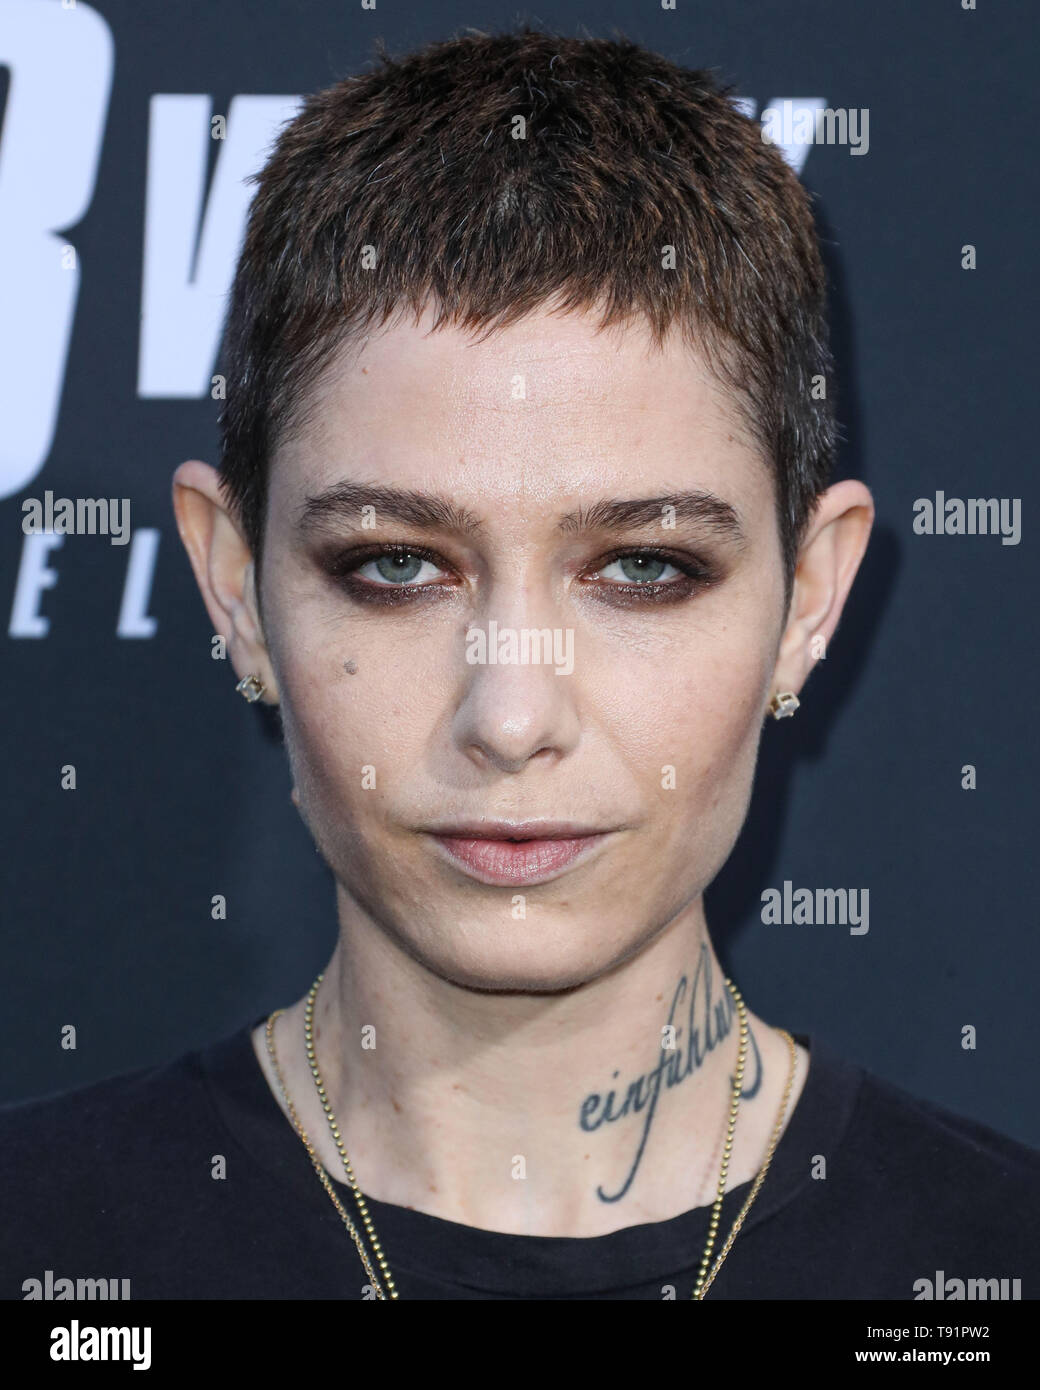 HOLLYWOOD, LOS ANGELES, CALIFORNIA, USA - MAY 15: Actress Asia Kate Dillon arrives at the Los Angeles Special Screening Of Lionsgate's 'John Wick: Chapter 3 - Parabellum' held at the TCL Chinese Theatre IMAX on May 15, 2019 in Los Angeles, California, United States. (Photo by Xavier Collin/Image Press Agency) Stock Photo